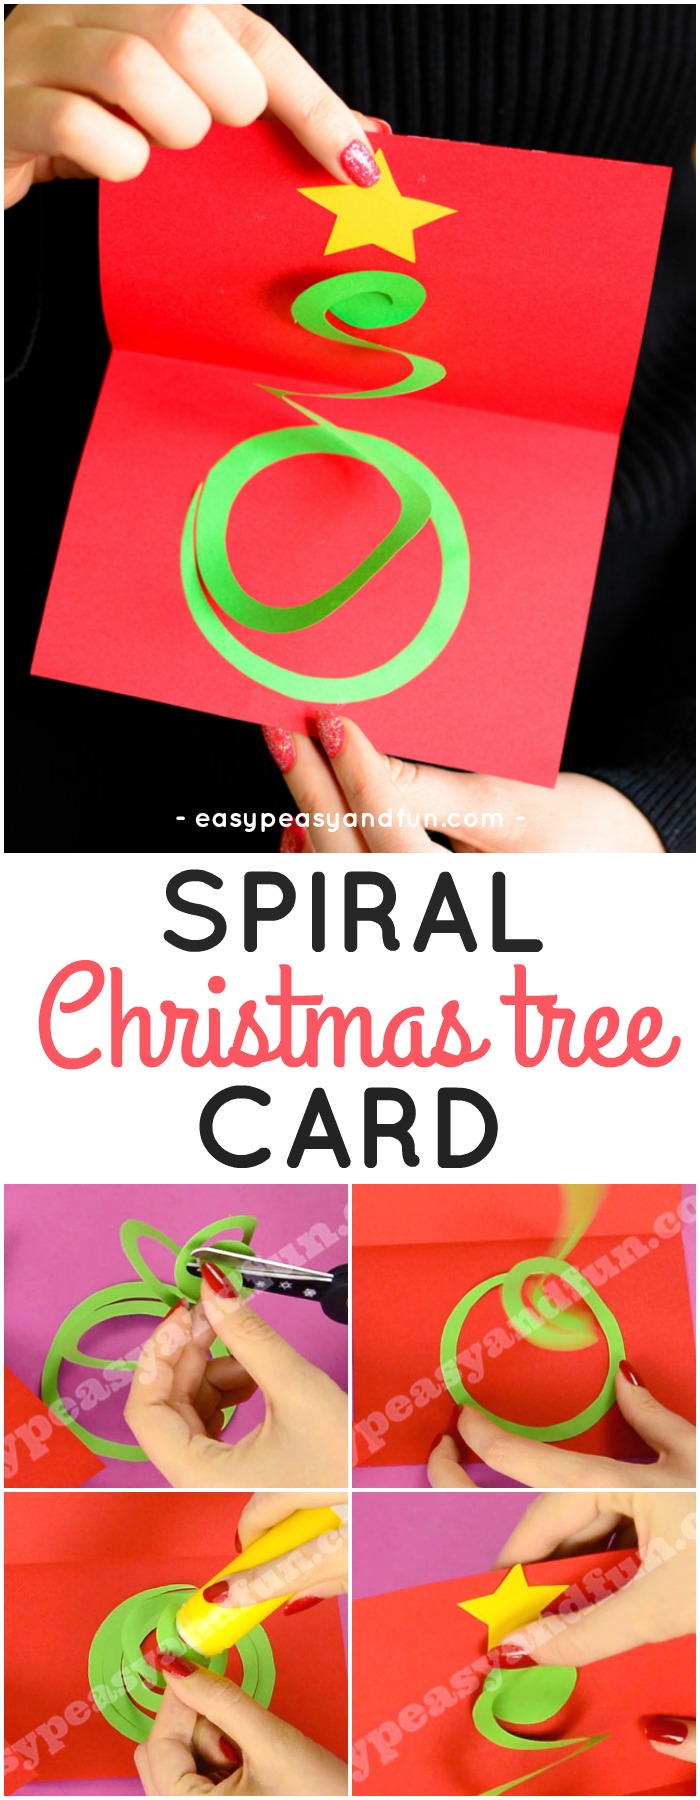 Spiral Christmas Tree Card Idea. Fun Christmas paper craft for kids to make. #Christmascraftsforkids #papercraftsforkids #DIYChristmascard